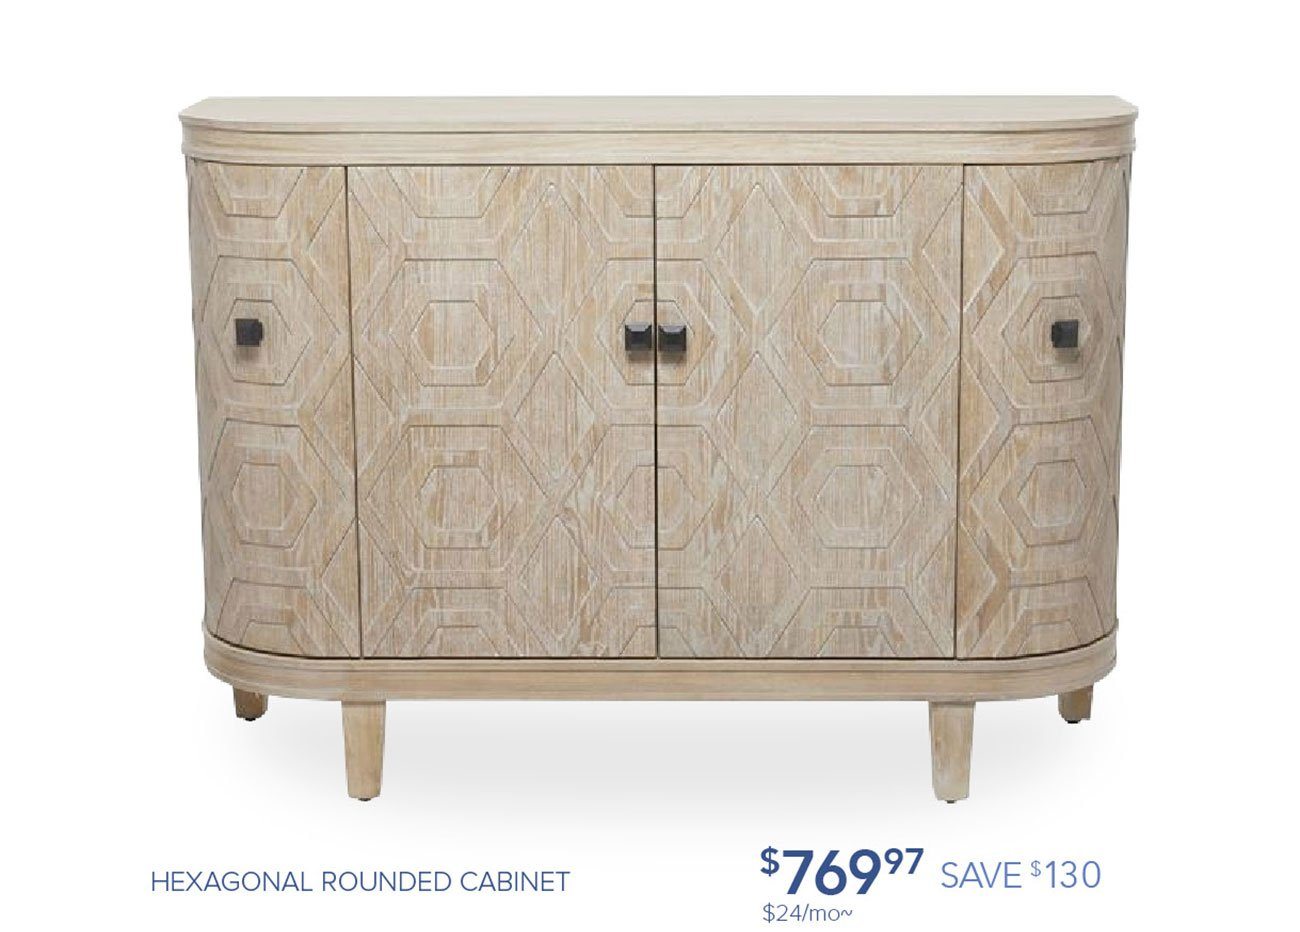 Hexagonal-rounded-cabinet